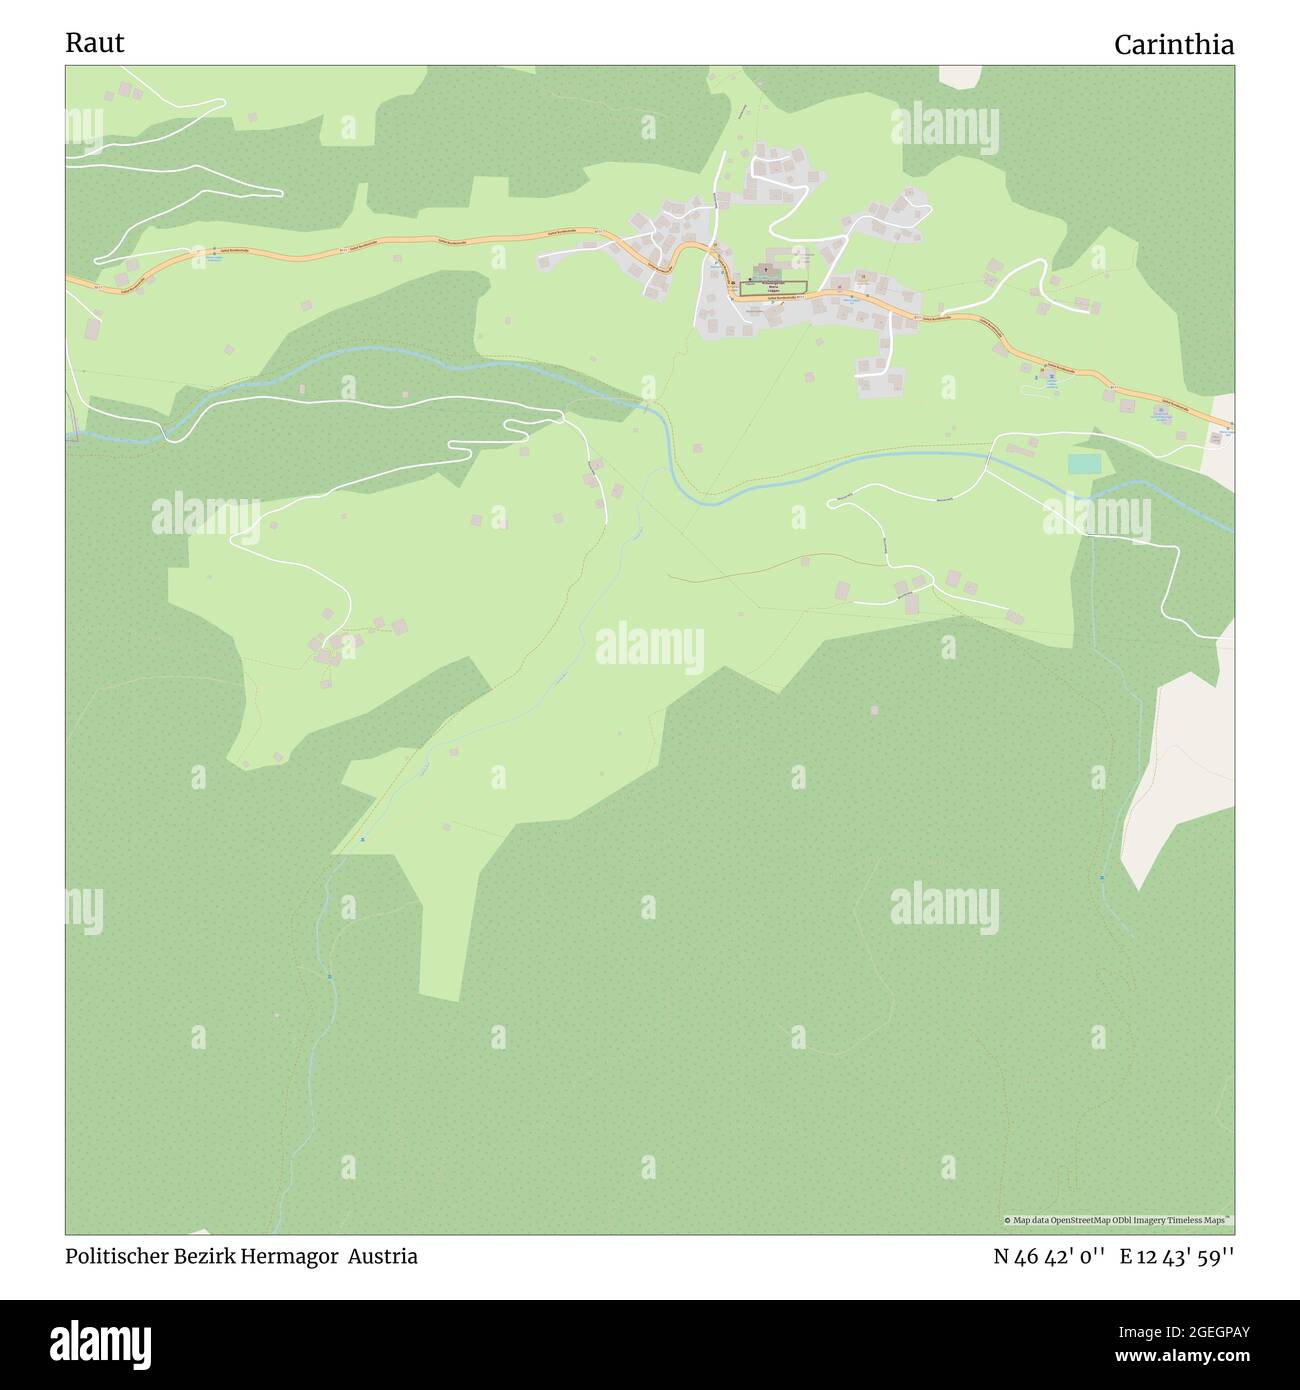 Raut, Politischer Bezirk Hermagor, Austria, Carinthia, N 46 42' 0'', E 12 43' 59'', map, Timeless Map published in 2021. Travelers, explorers and adventurers like Florence Nightingale, David Livingstone, Ernest Shackleton, Lewis and Clark and Sherlock Holmes relied on maps to plan travels to the world's most remote corners, Timeless Maps is mapping most locations on the globe, showing the achievement of great dreams Stock Photo